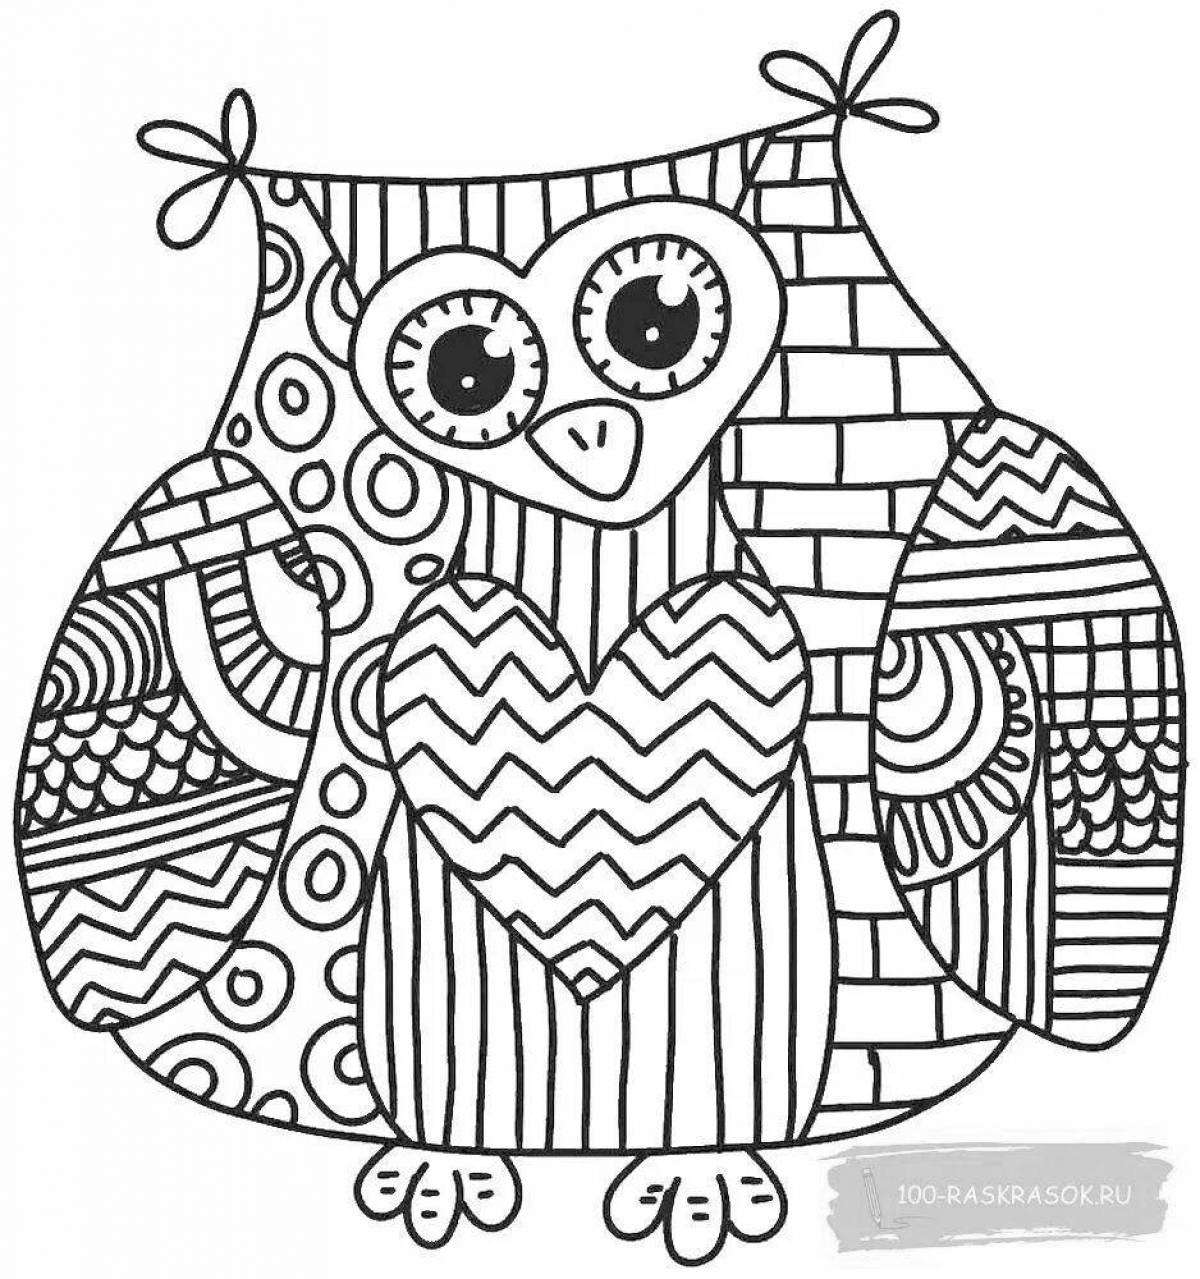 Colourful anti-stress coloring book for children